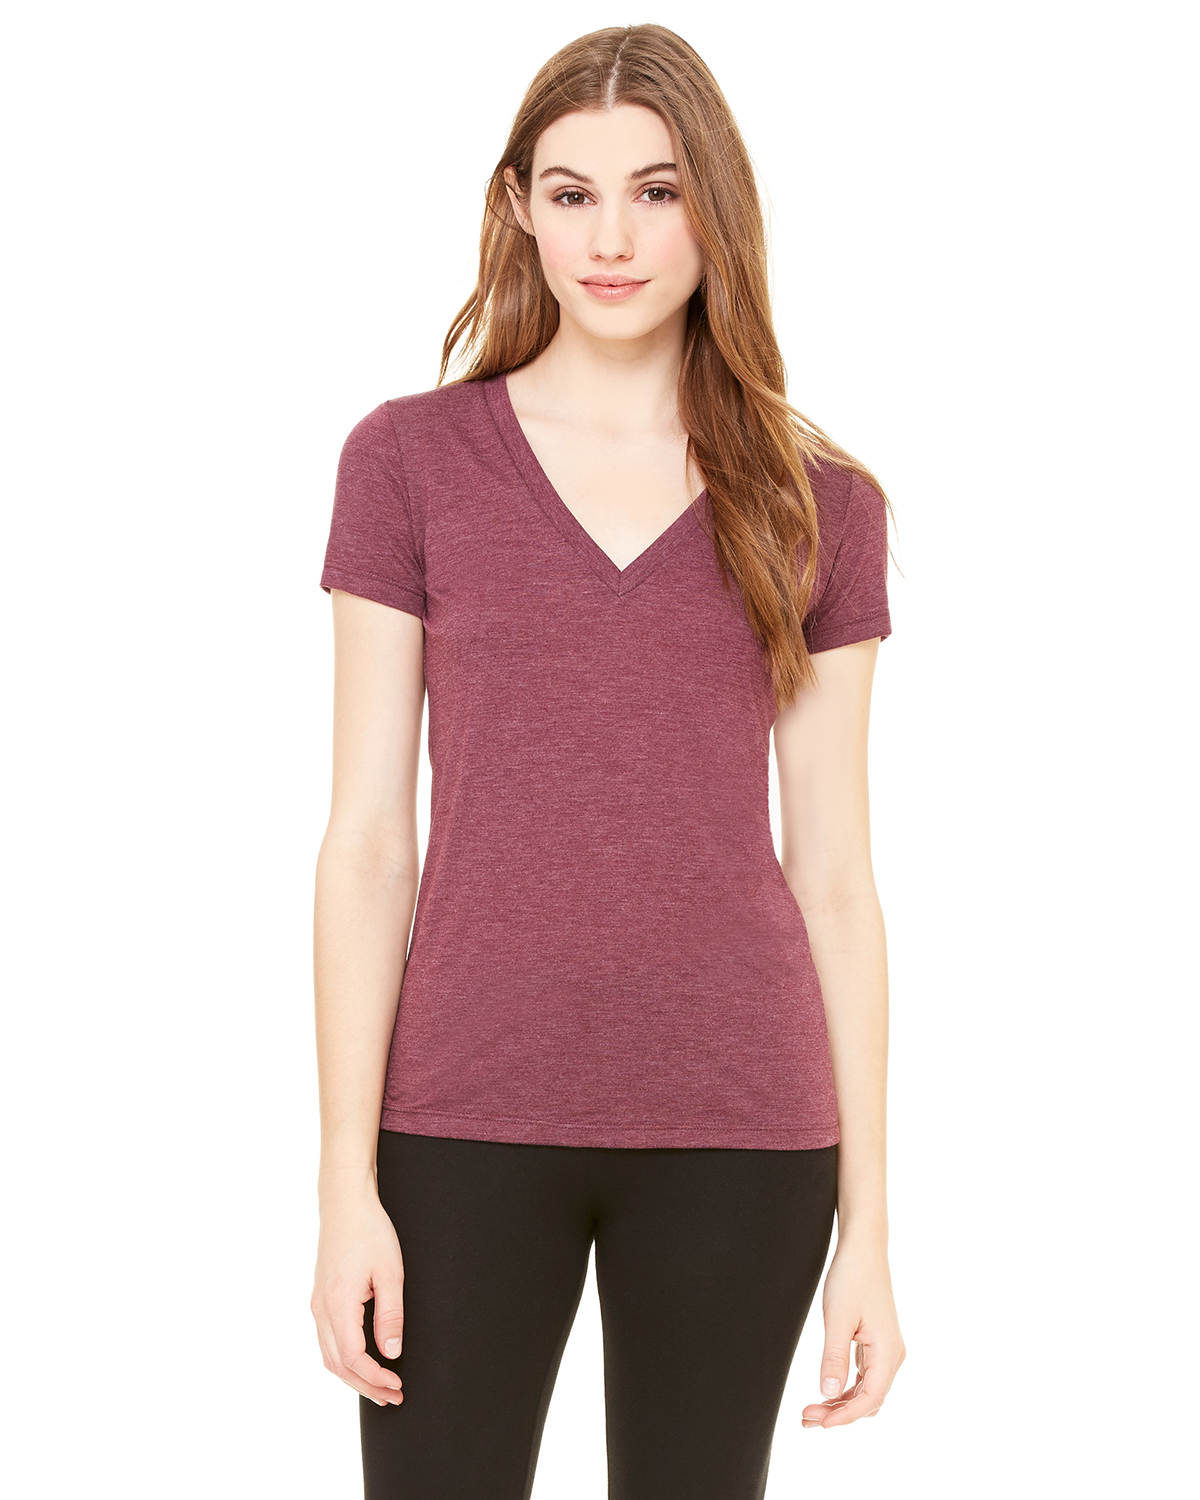 click to view Maroon Triblend